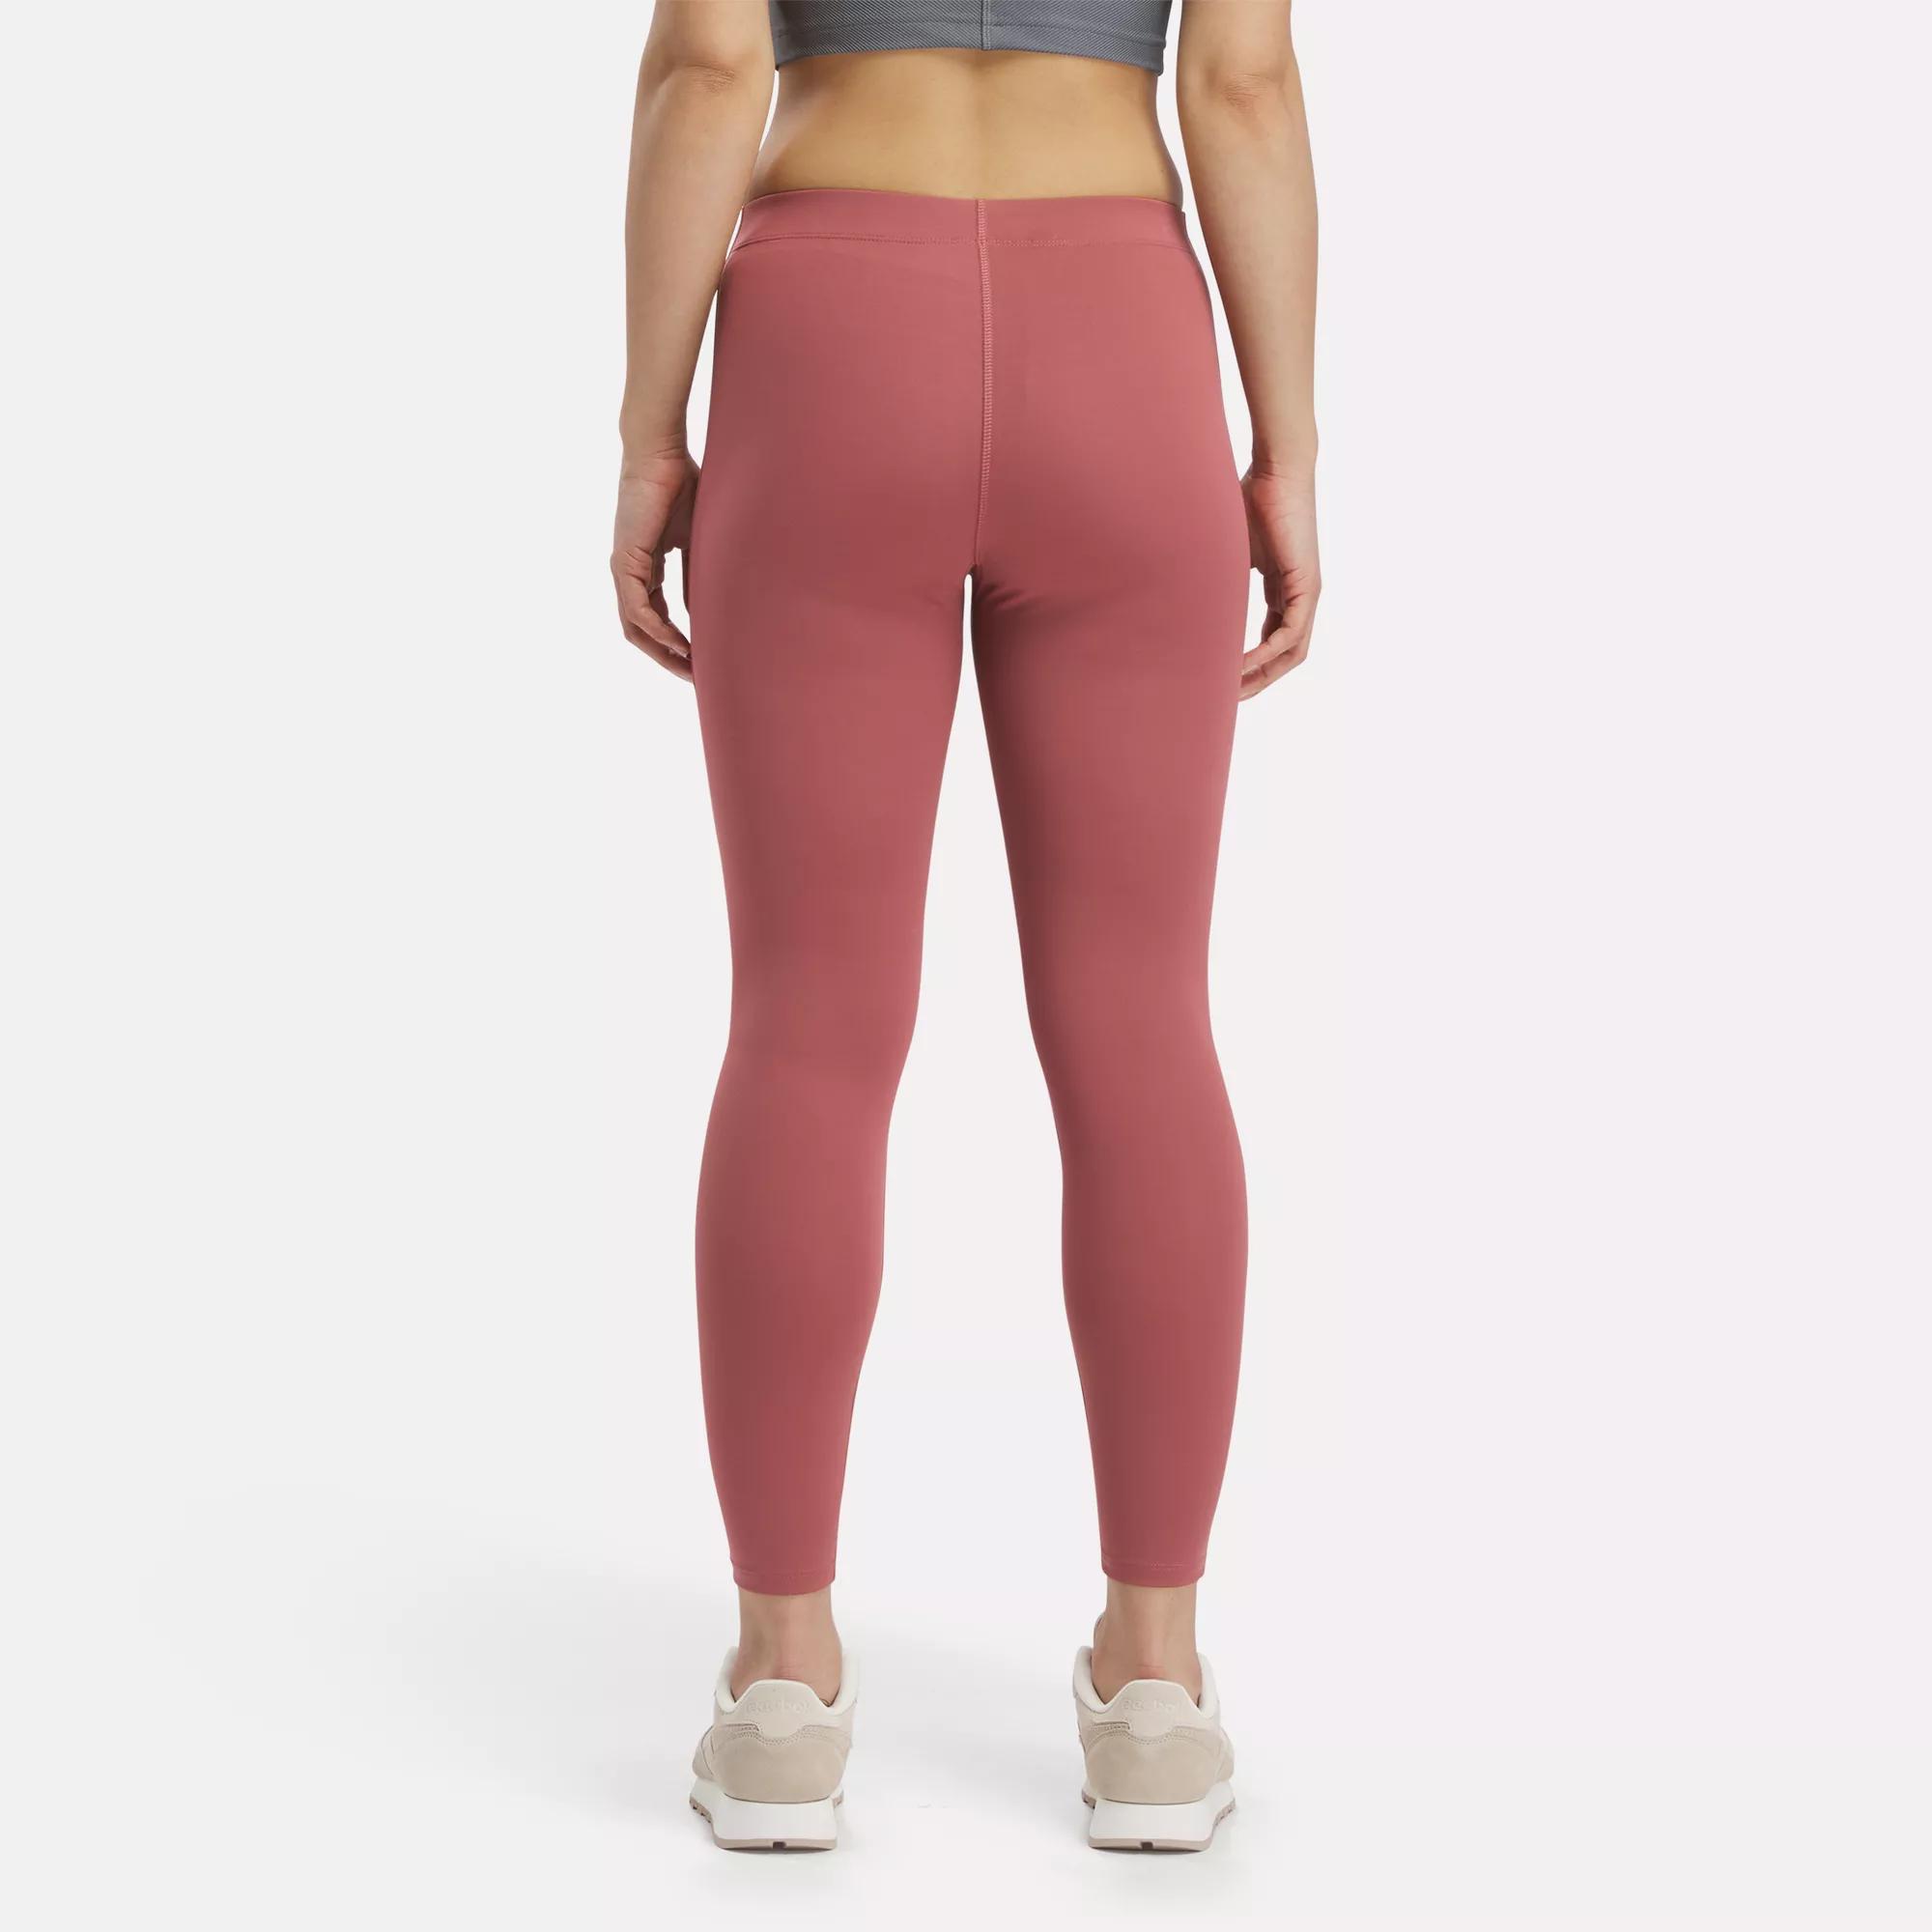 YOLIX 7 Pack High Waisted Leggings for Women, Soft Workout Athletic Yoga  Pants in 7 Colors and 2 Sizes